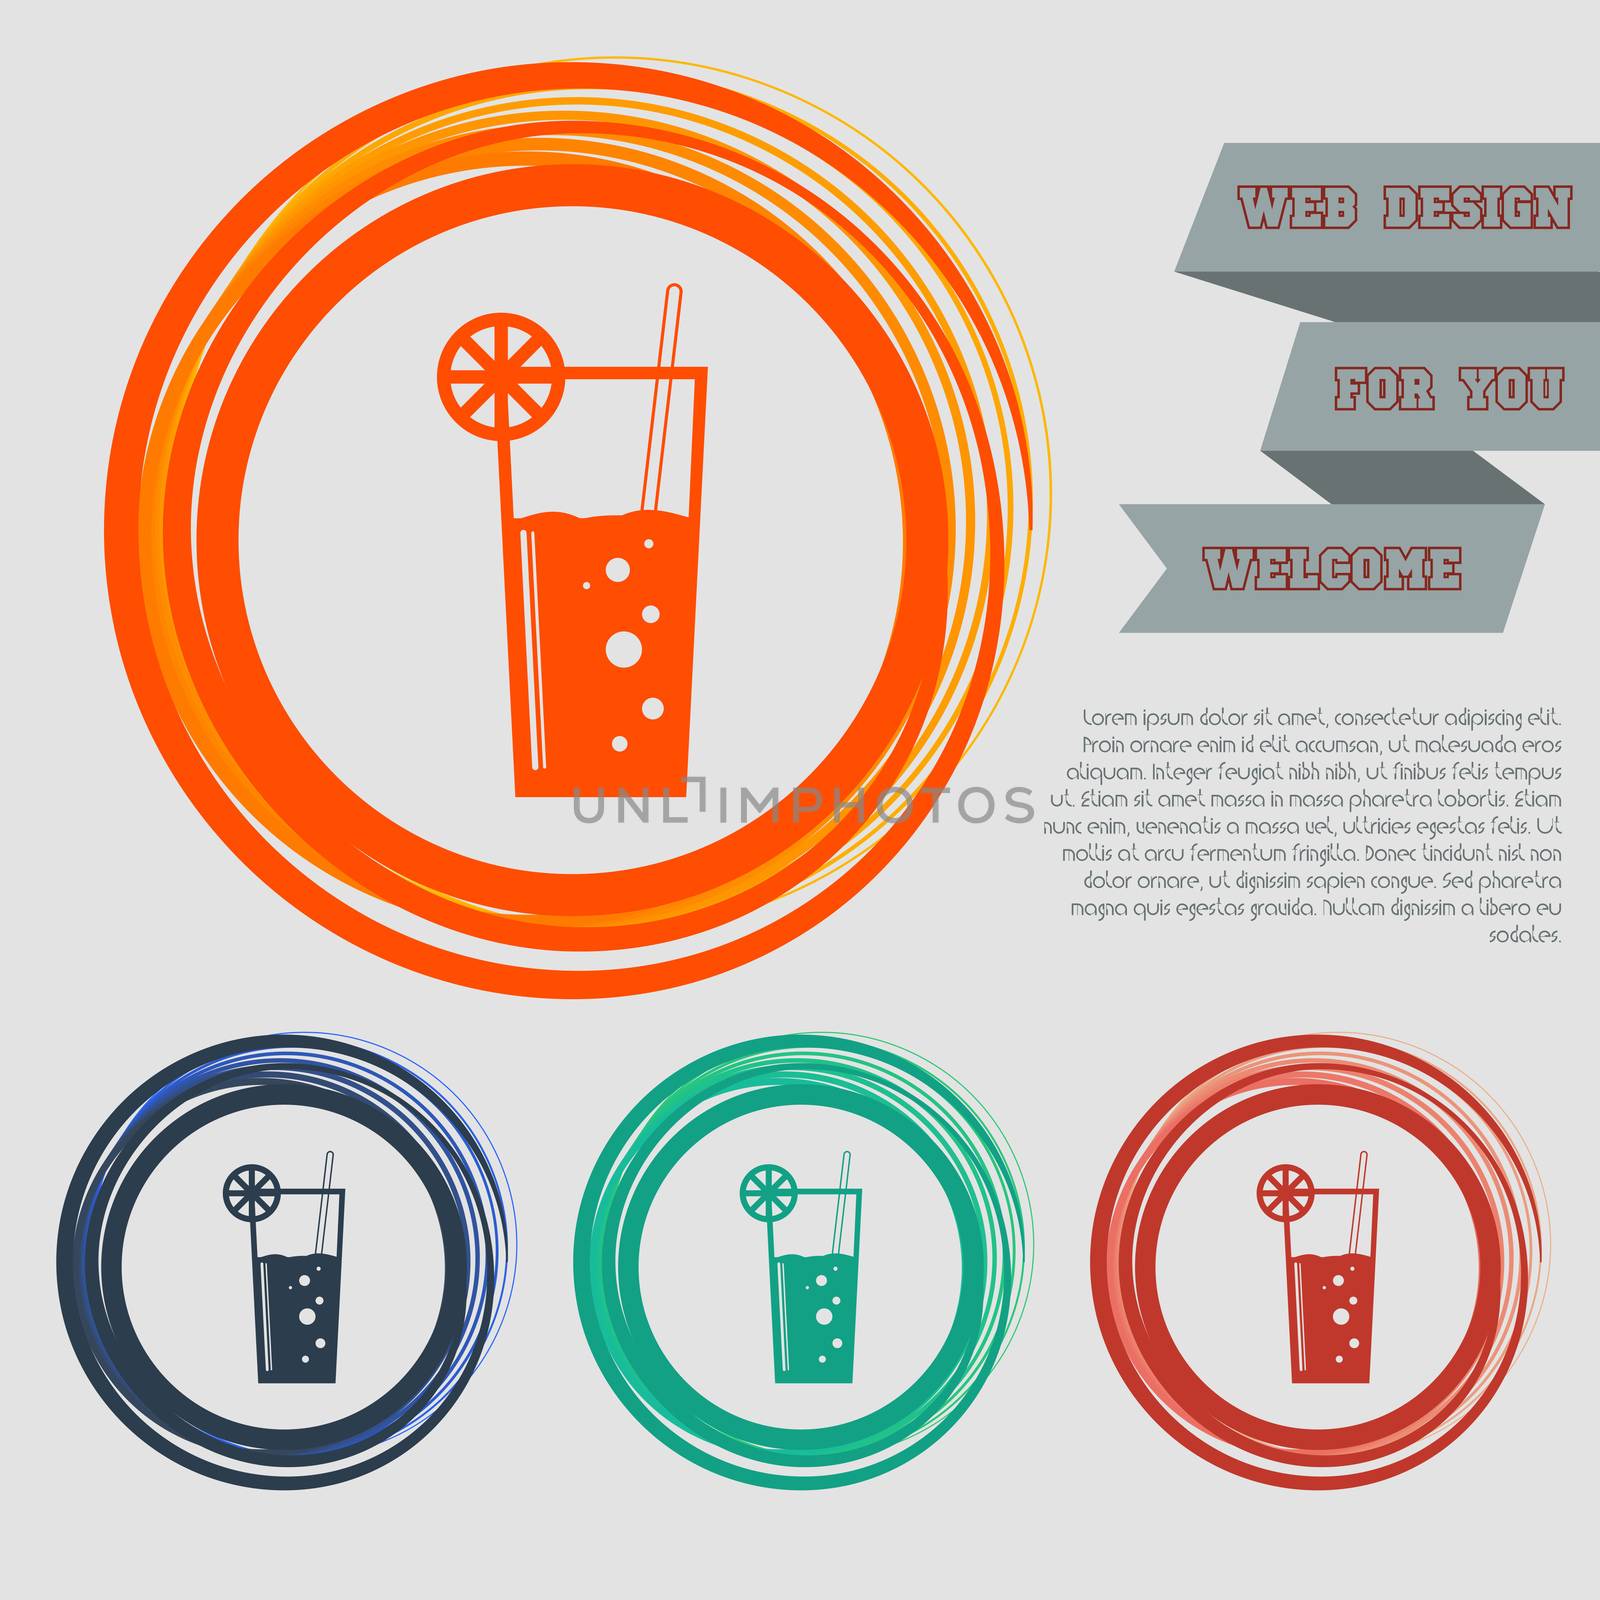 Cocktail Icon on the red, blue, green, orange buttons for your website and design with space text. illustration